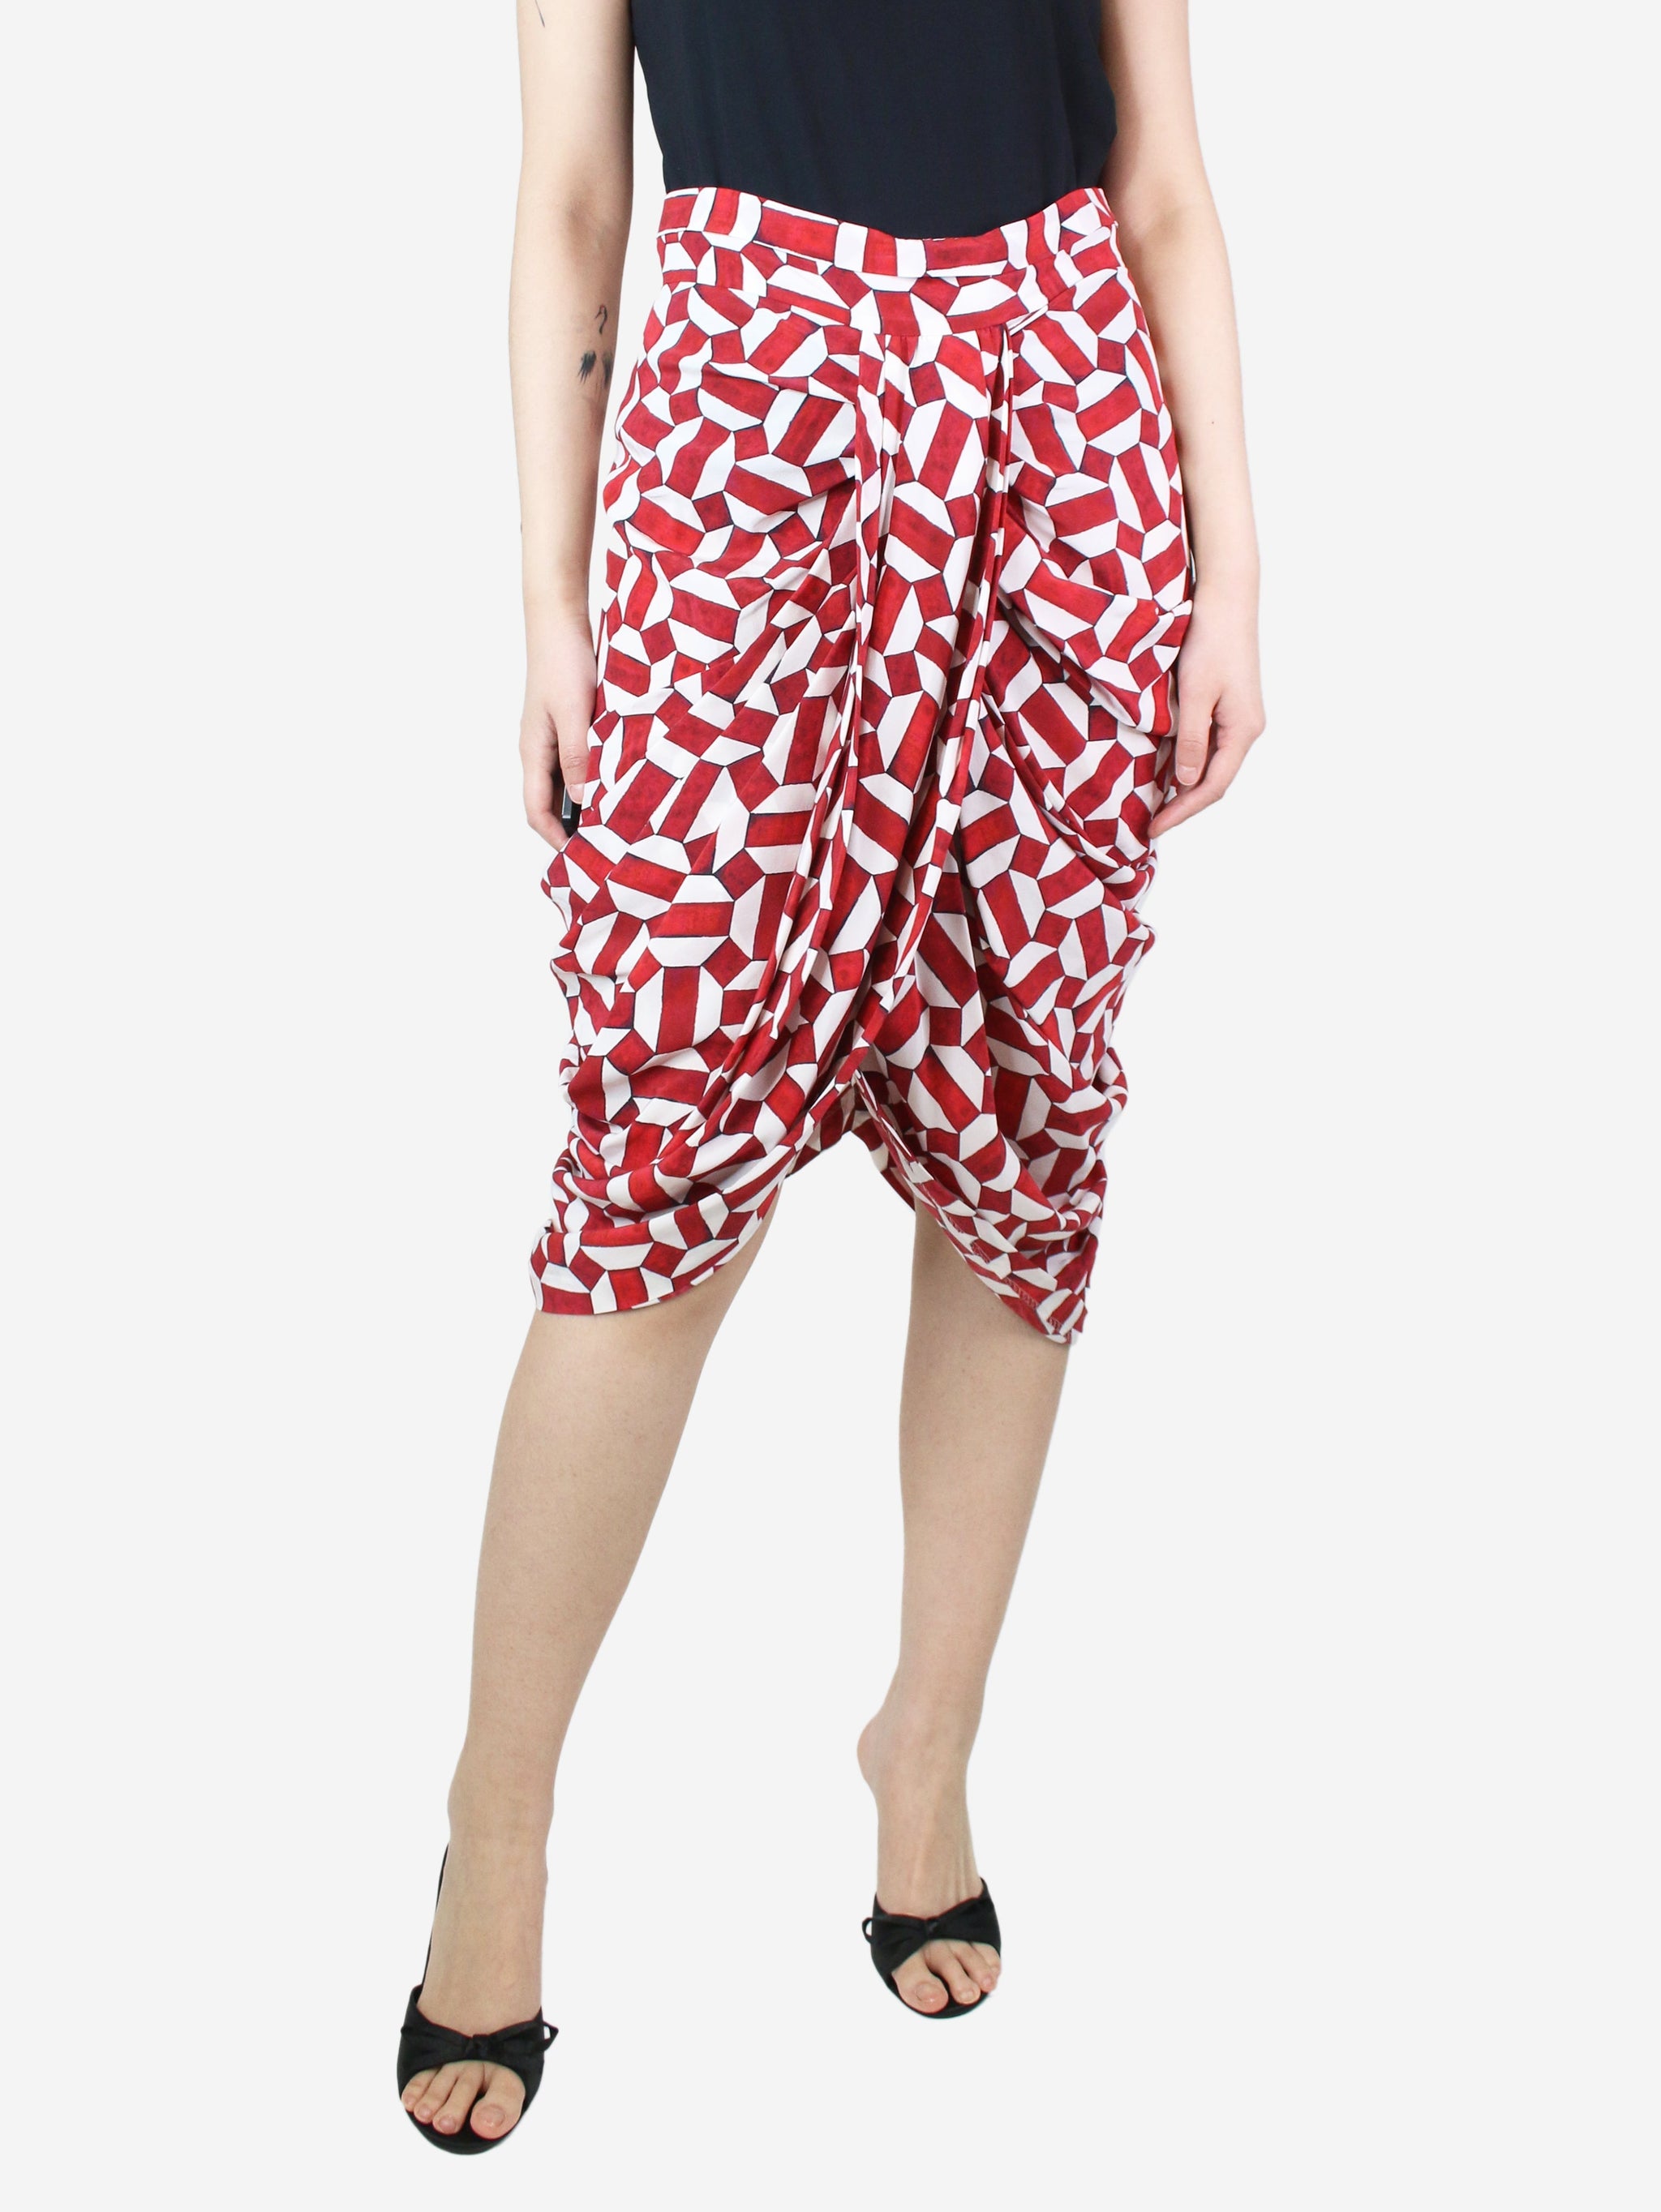 Isabel Marant pre-owned red geometric printed gathered skirt - size UK ...